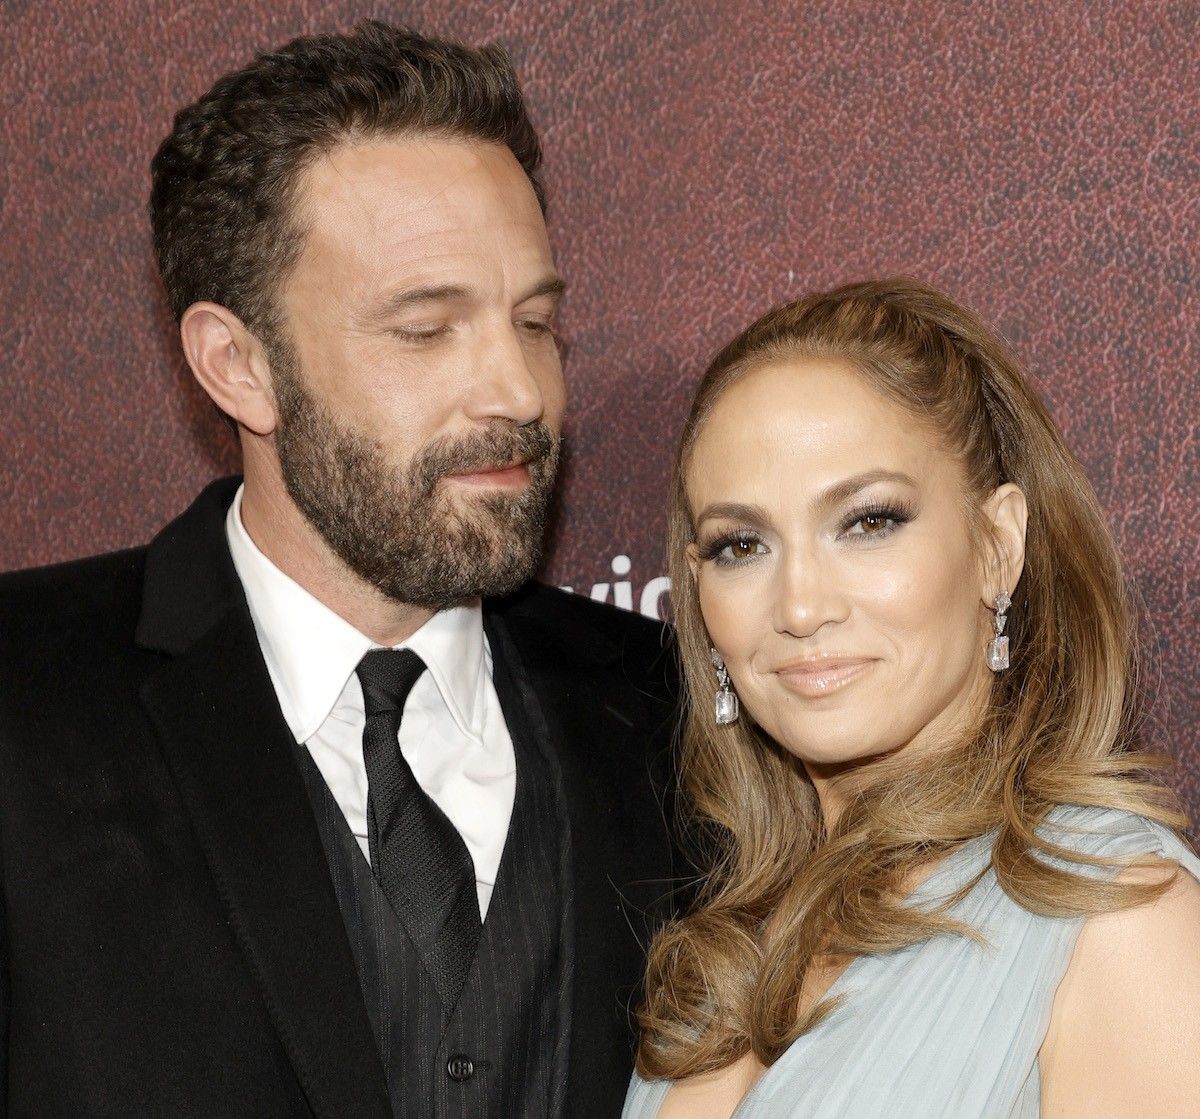 Jennifer Lopez And Ben Affleck Just Revealed The Real Reason They Originally Broke Up